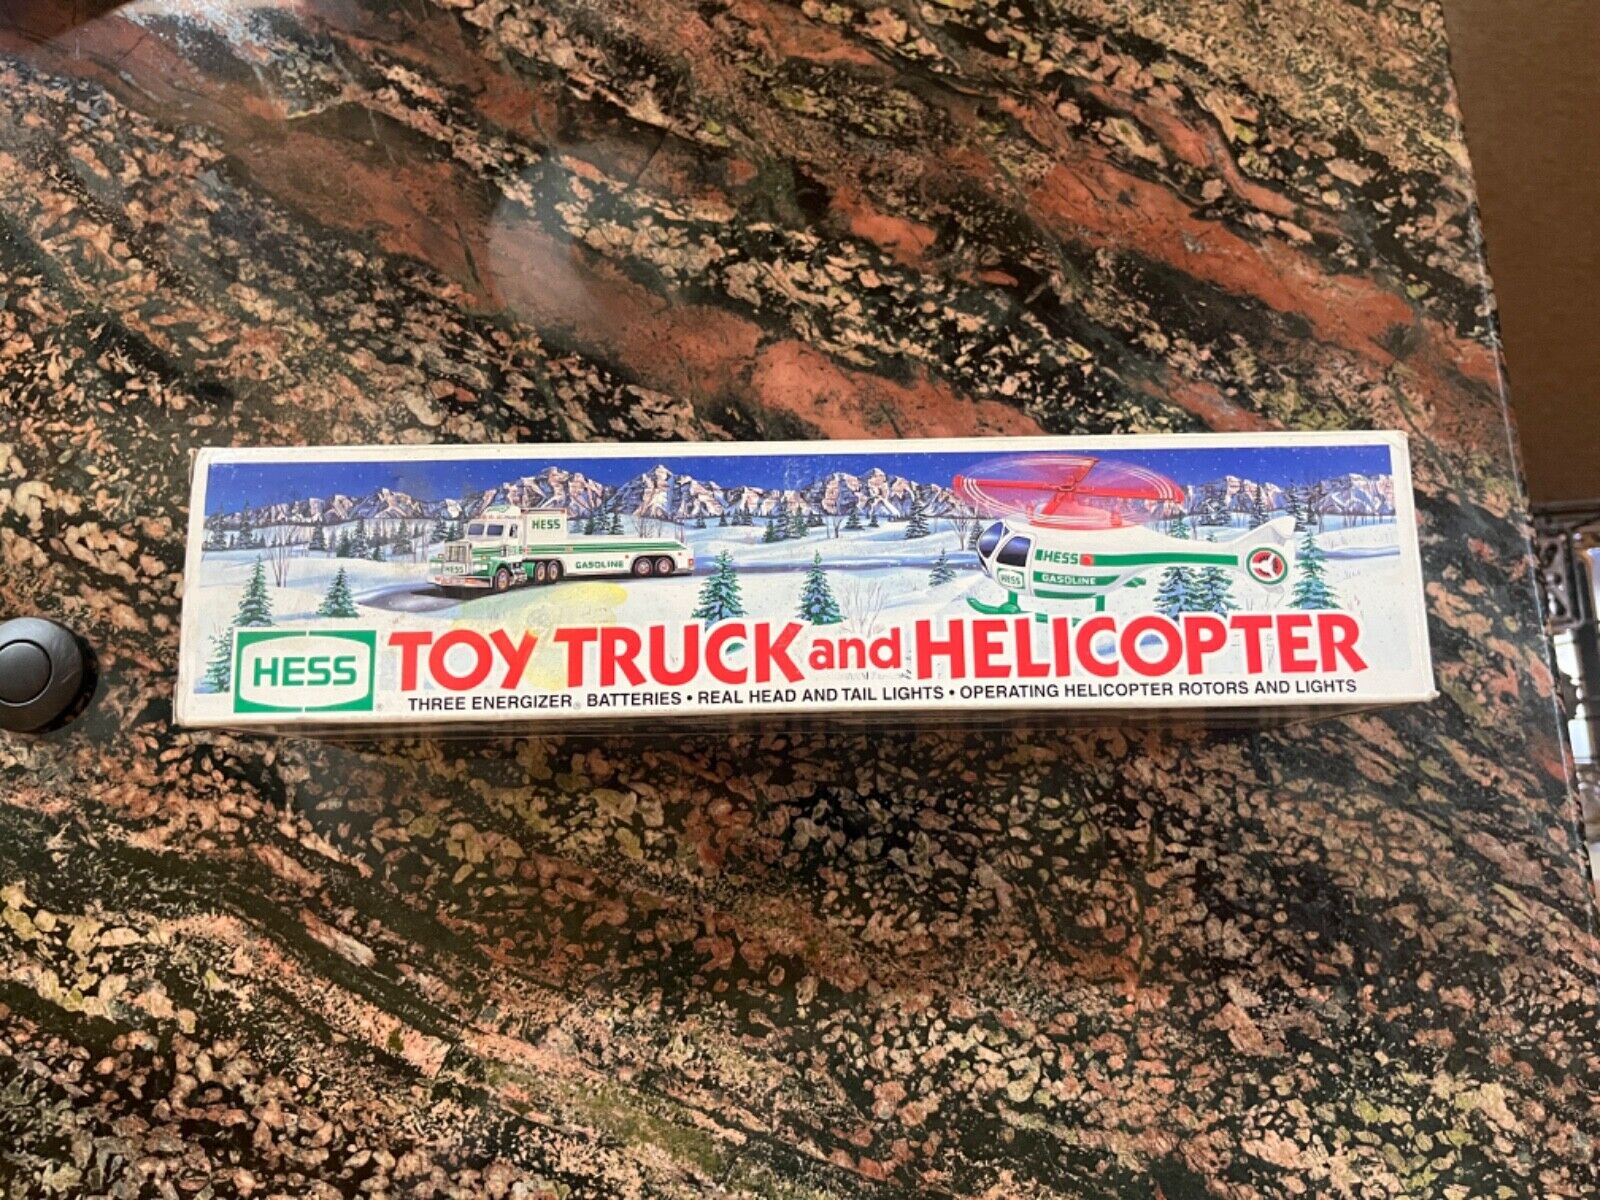 Hess toy tuck and helicopter